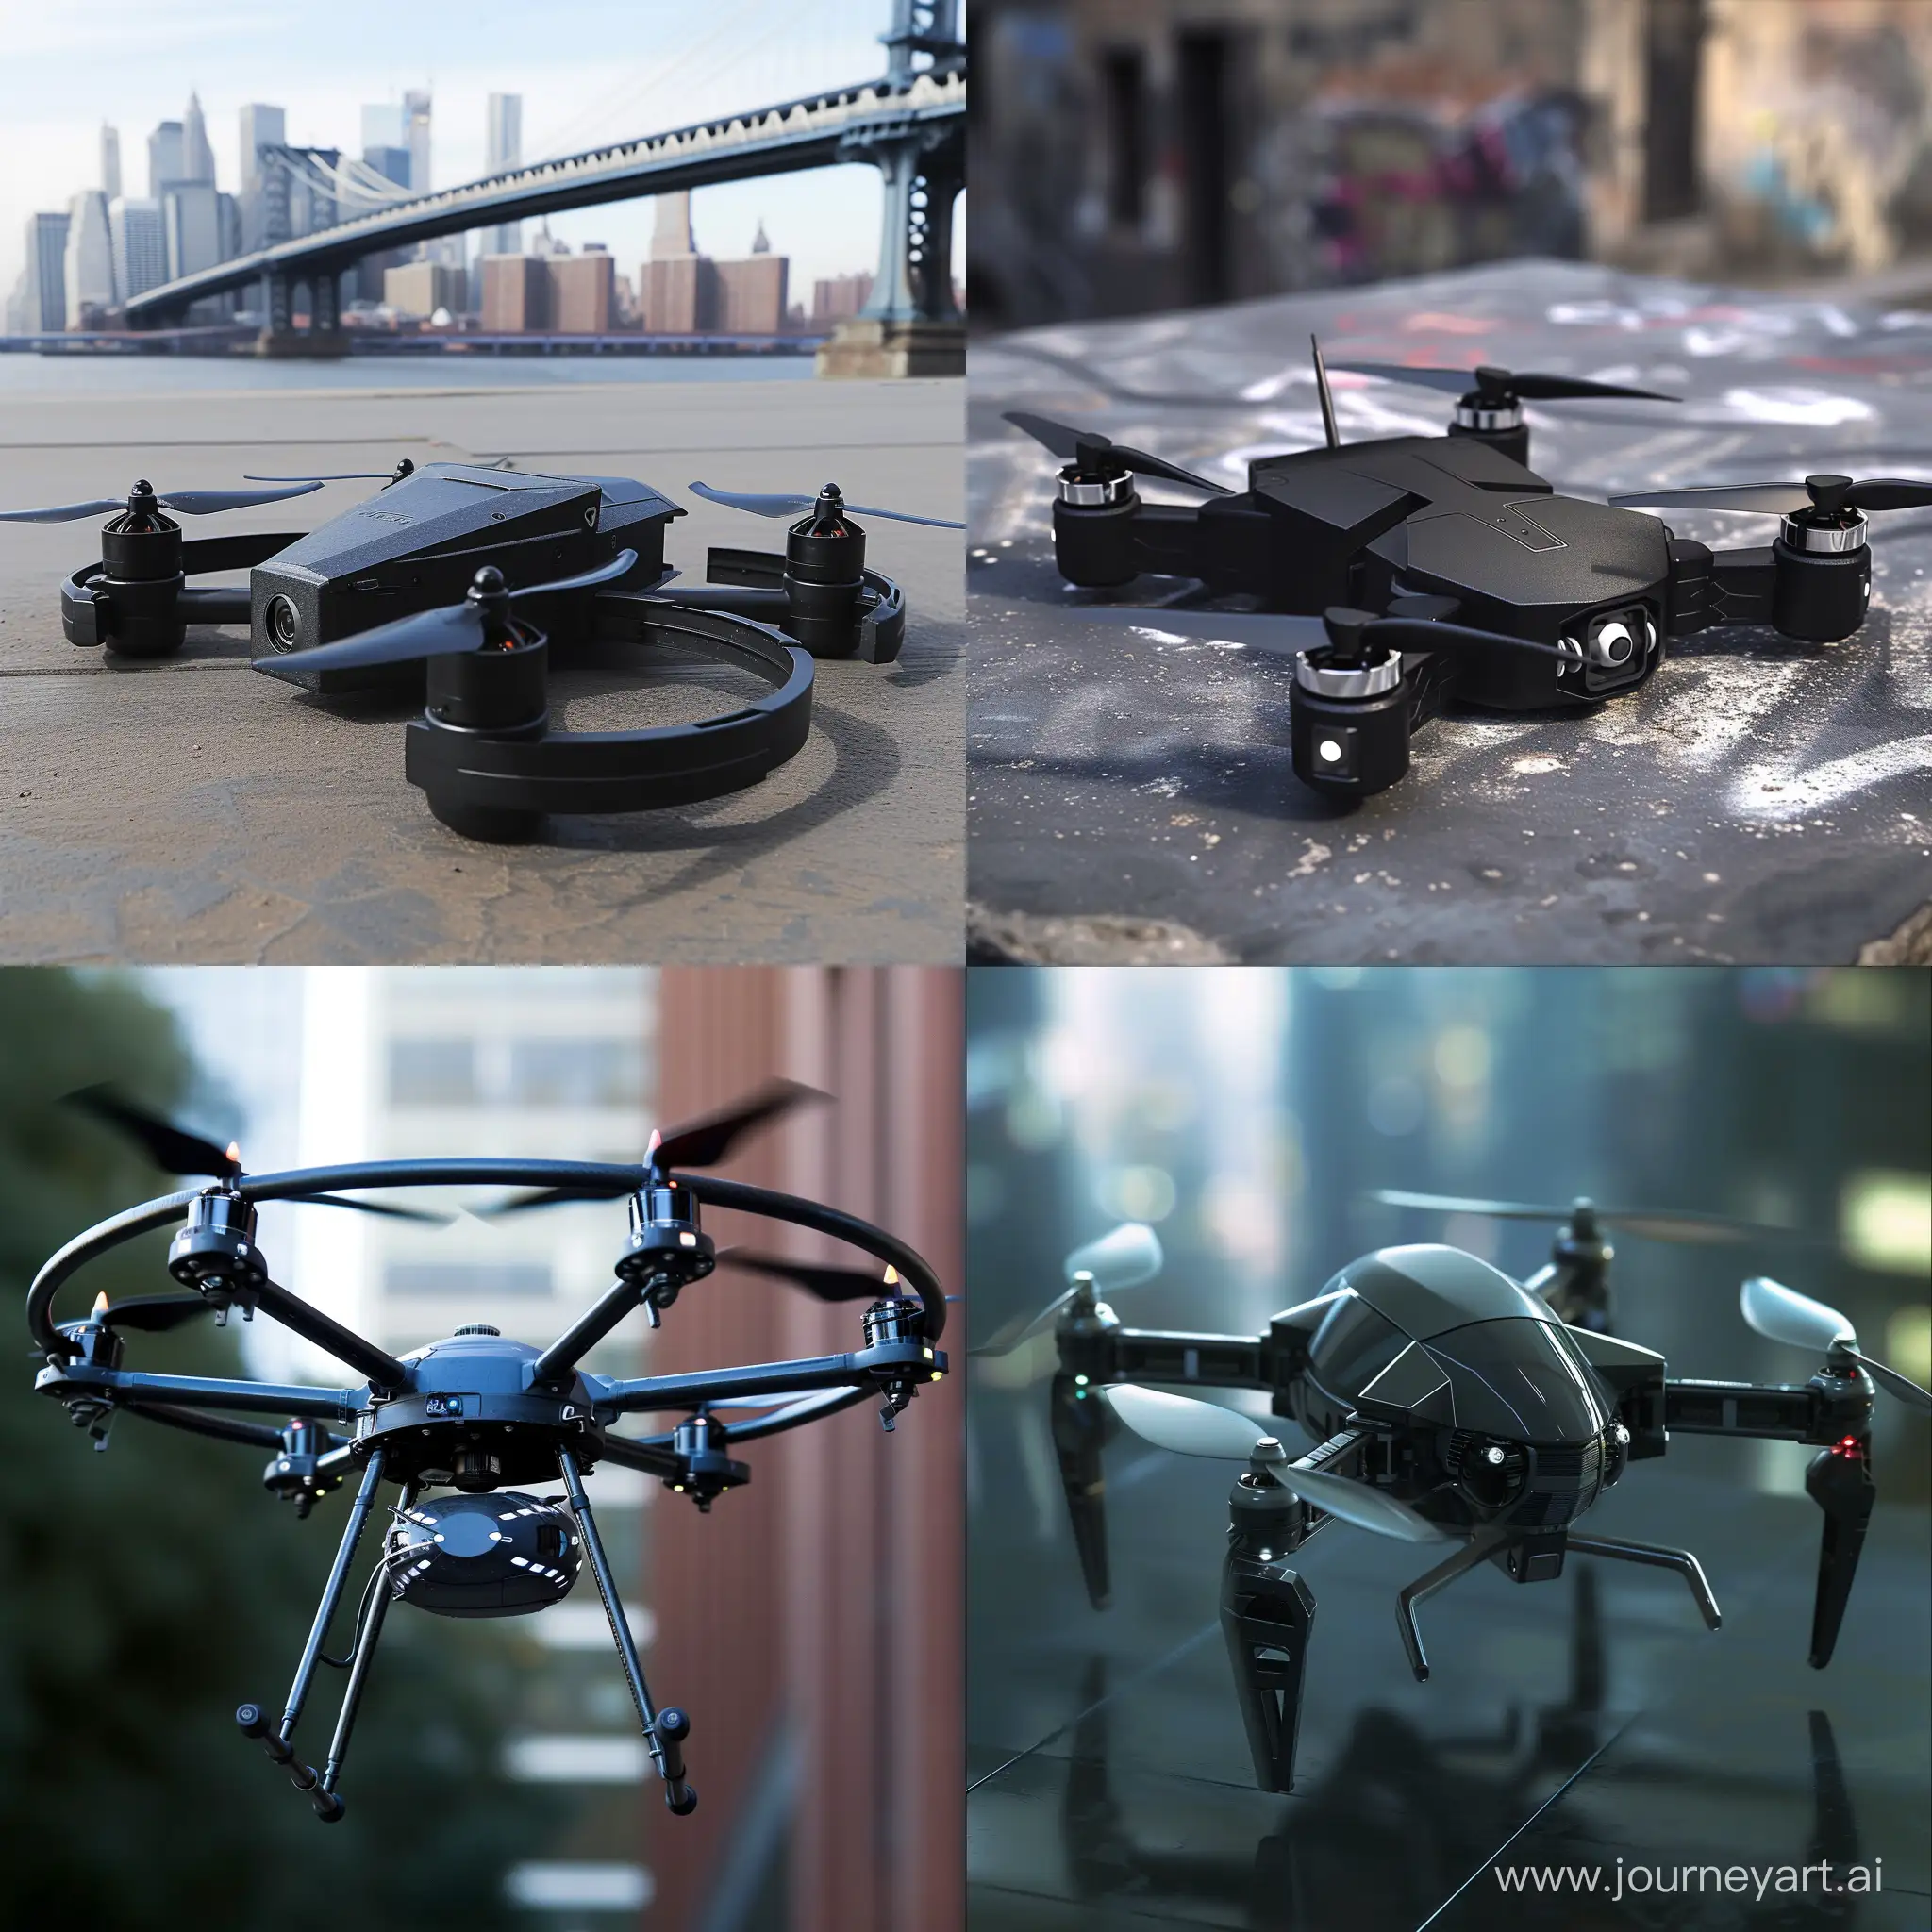 Imagine a compact robotic drone, that seamlessly navigates urban environments to monitor and prevent crimes.